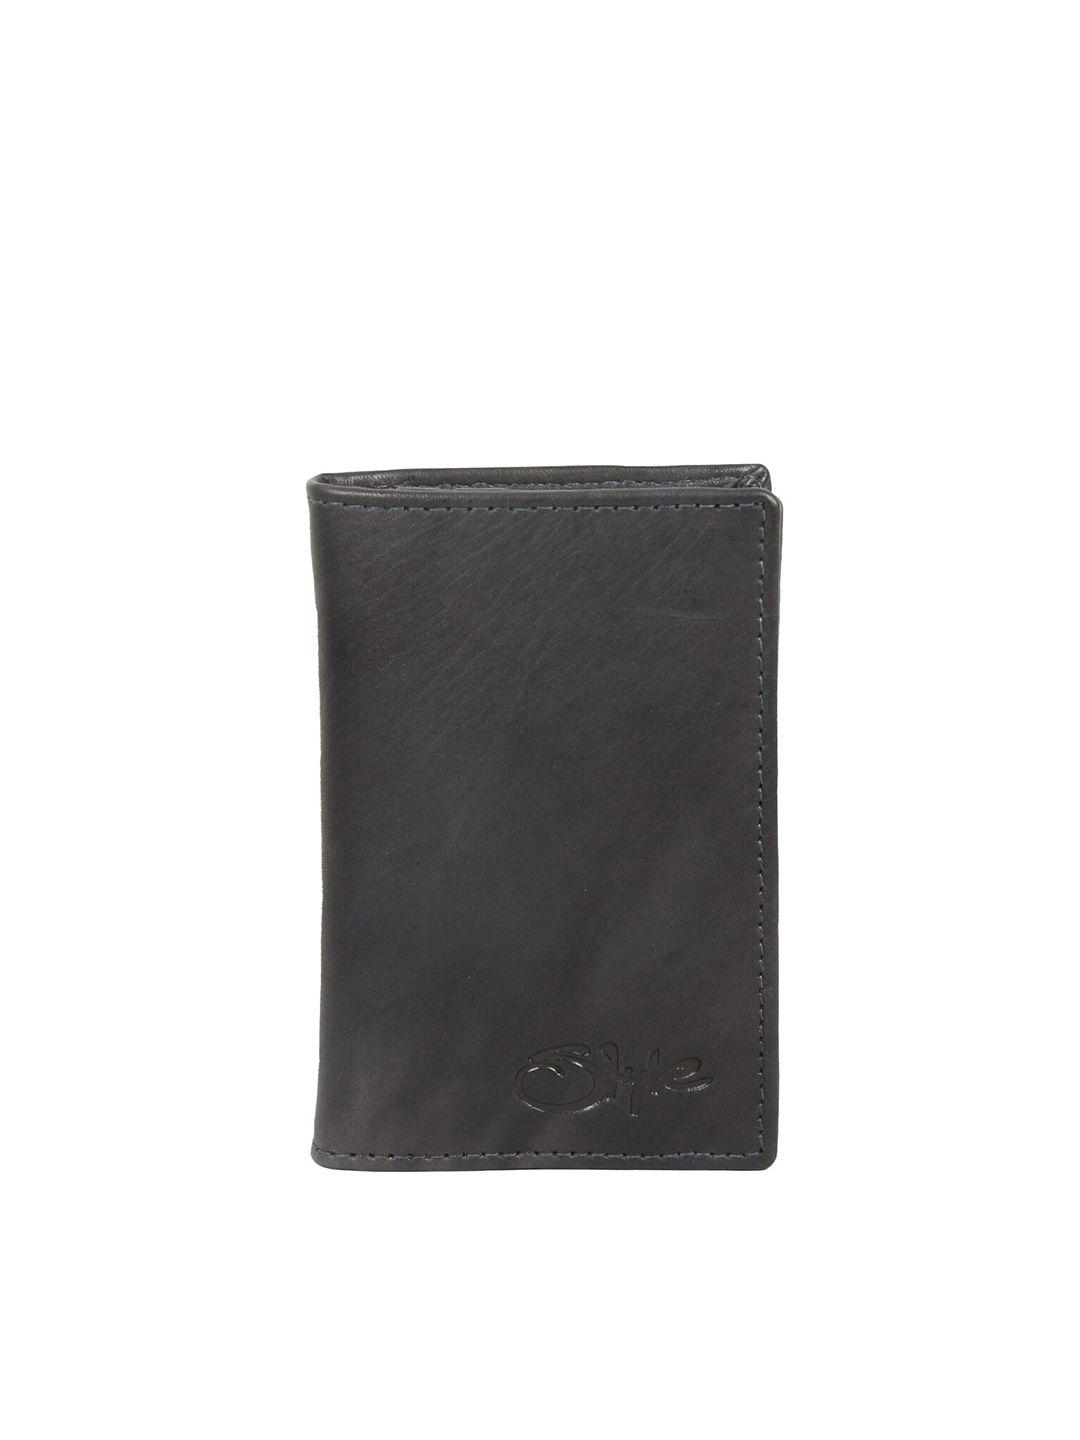 style shoes leather card holder with sd card holder